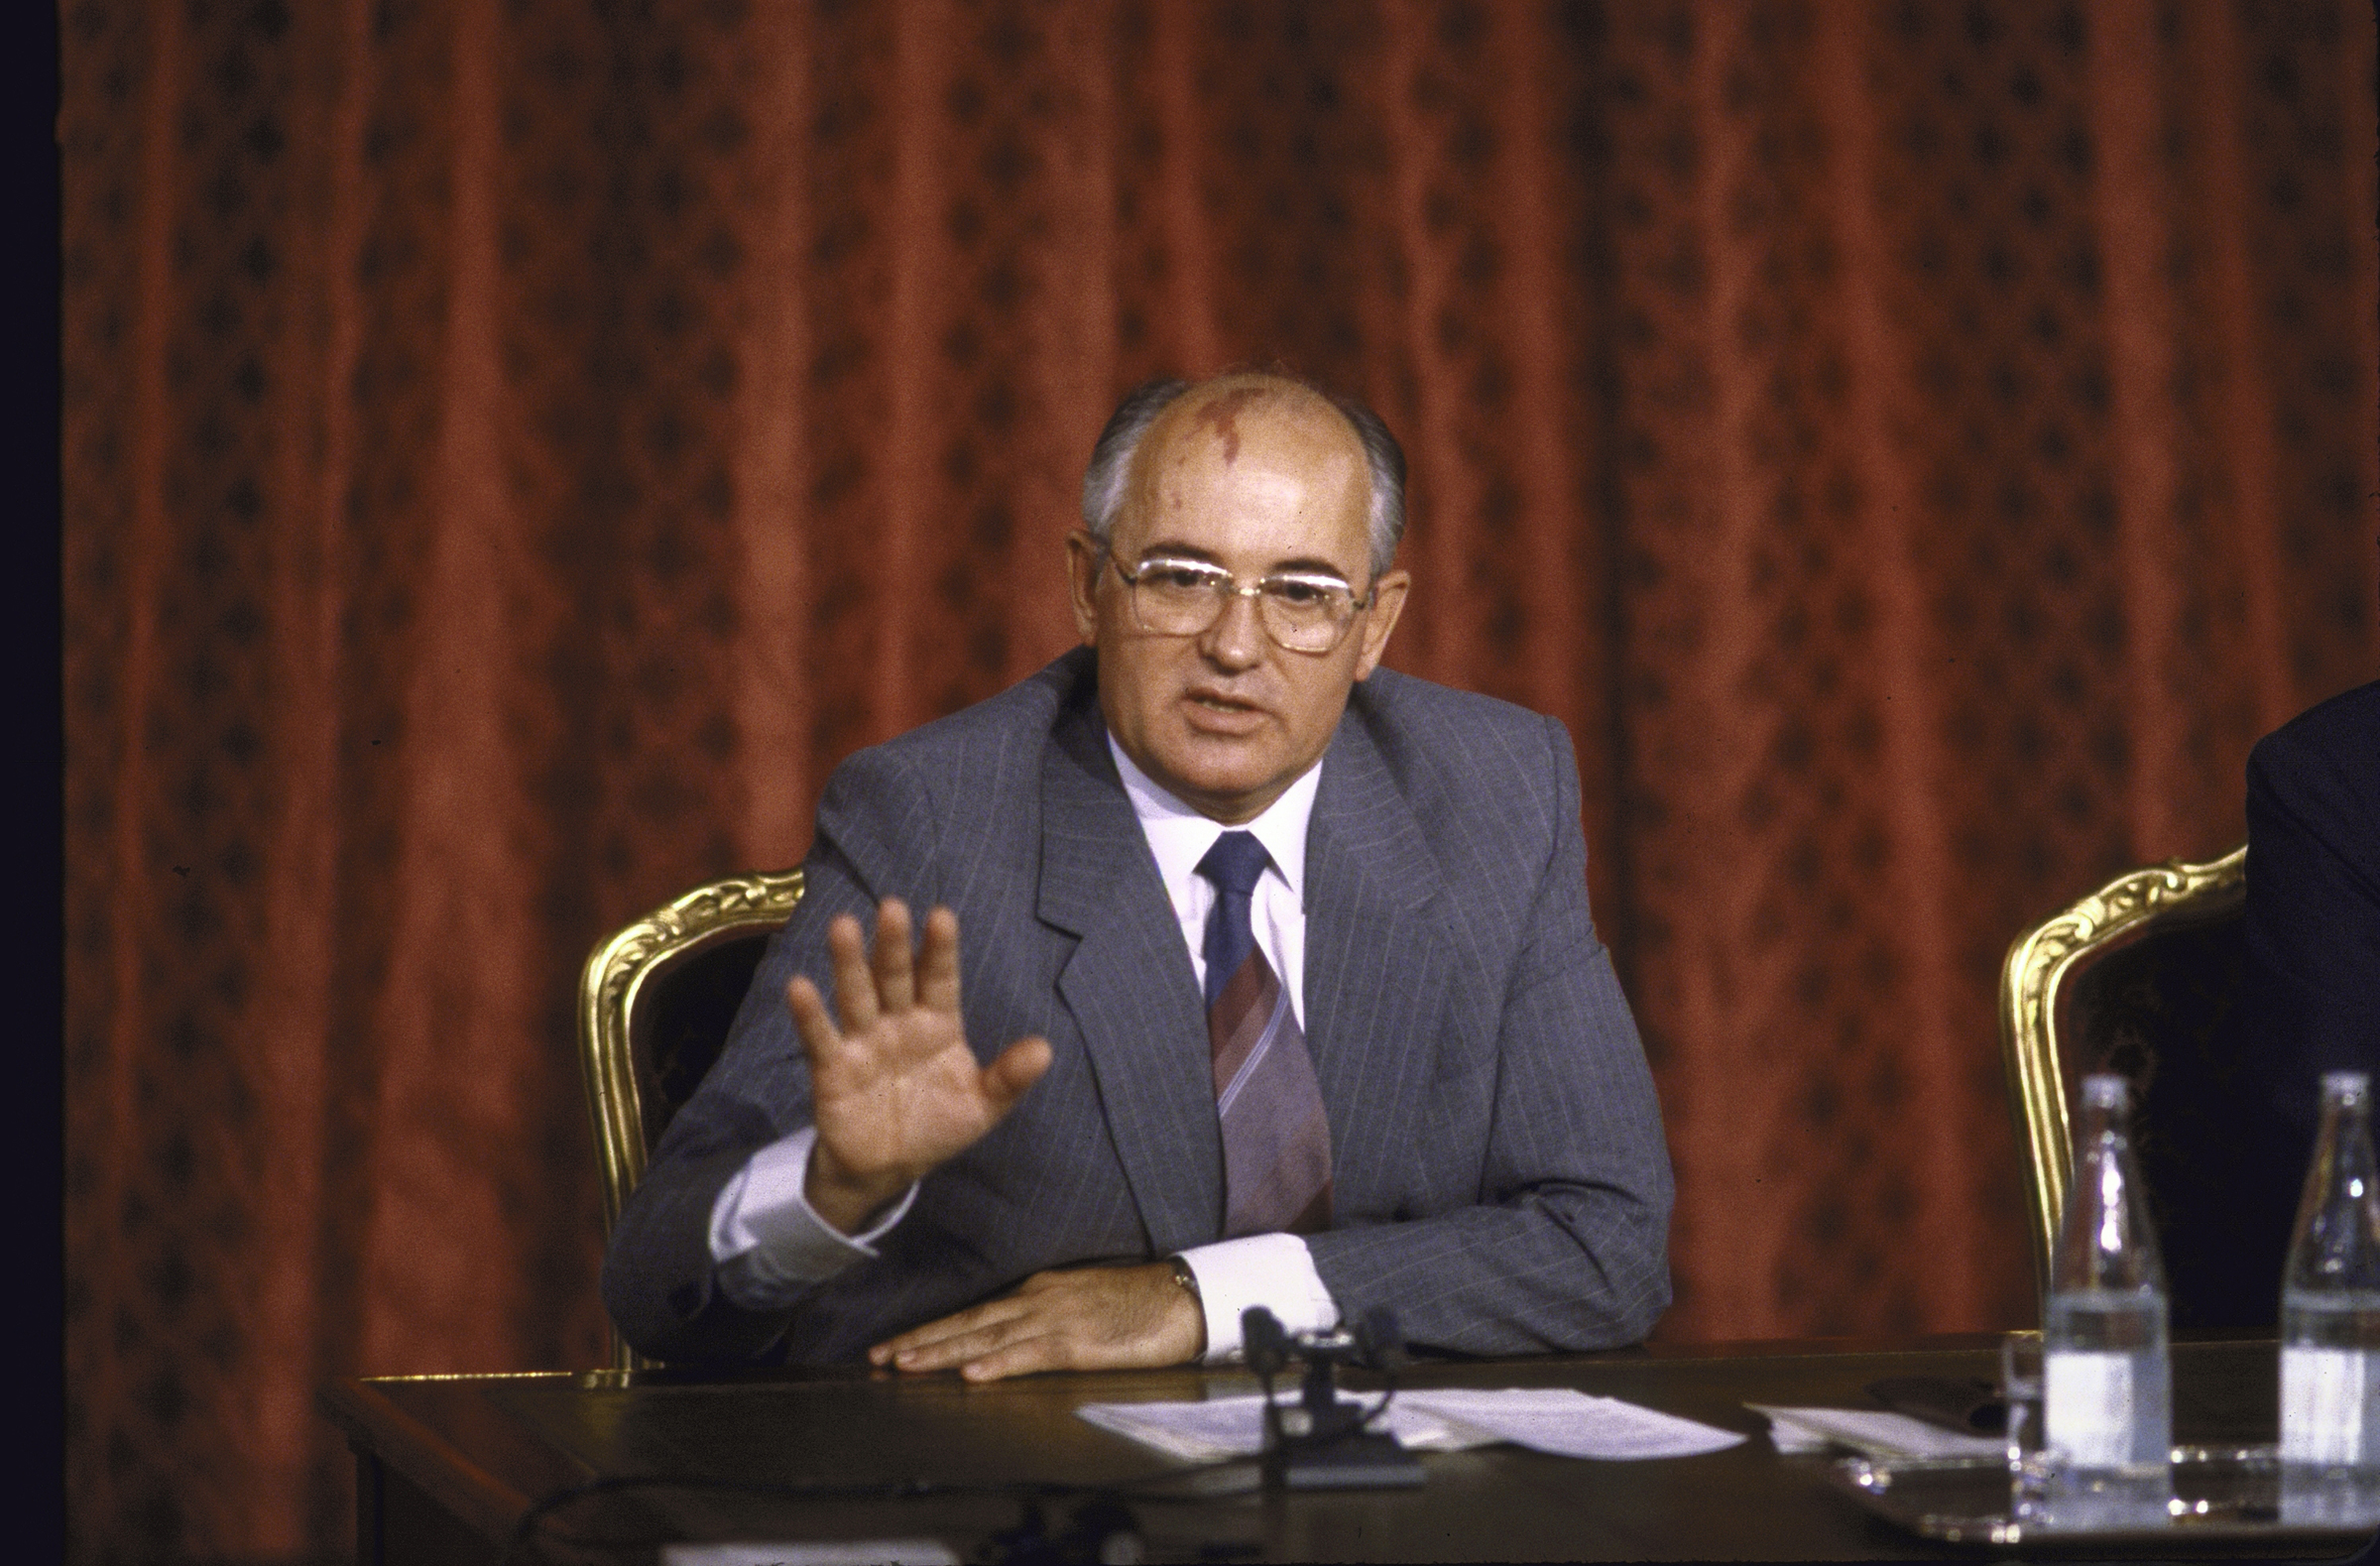 Soviet leader Mikhail Gorbachev at a press conference in the Elysee Palace in Paris, France, in 1985. (Francois Lochon—The LIFE Images Collection/Getty Images)